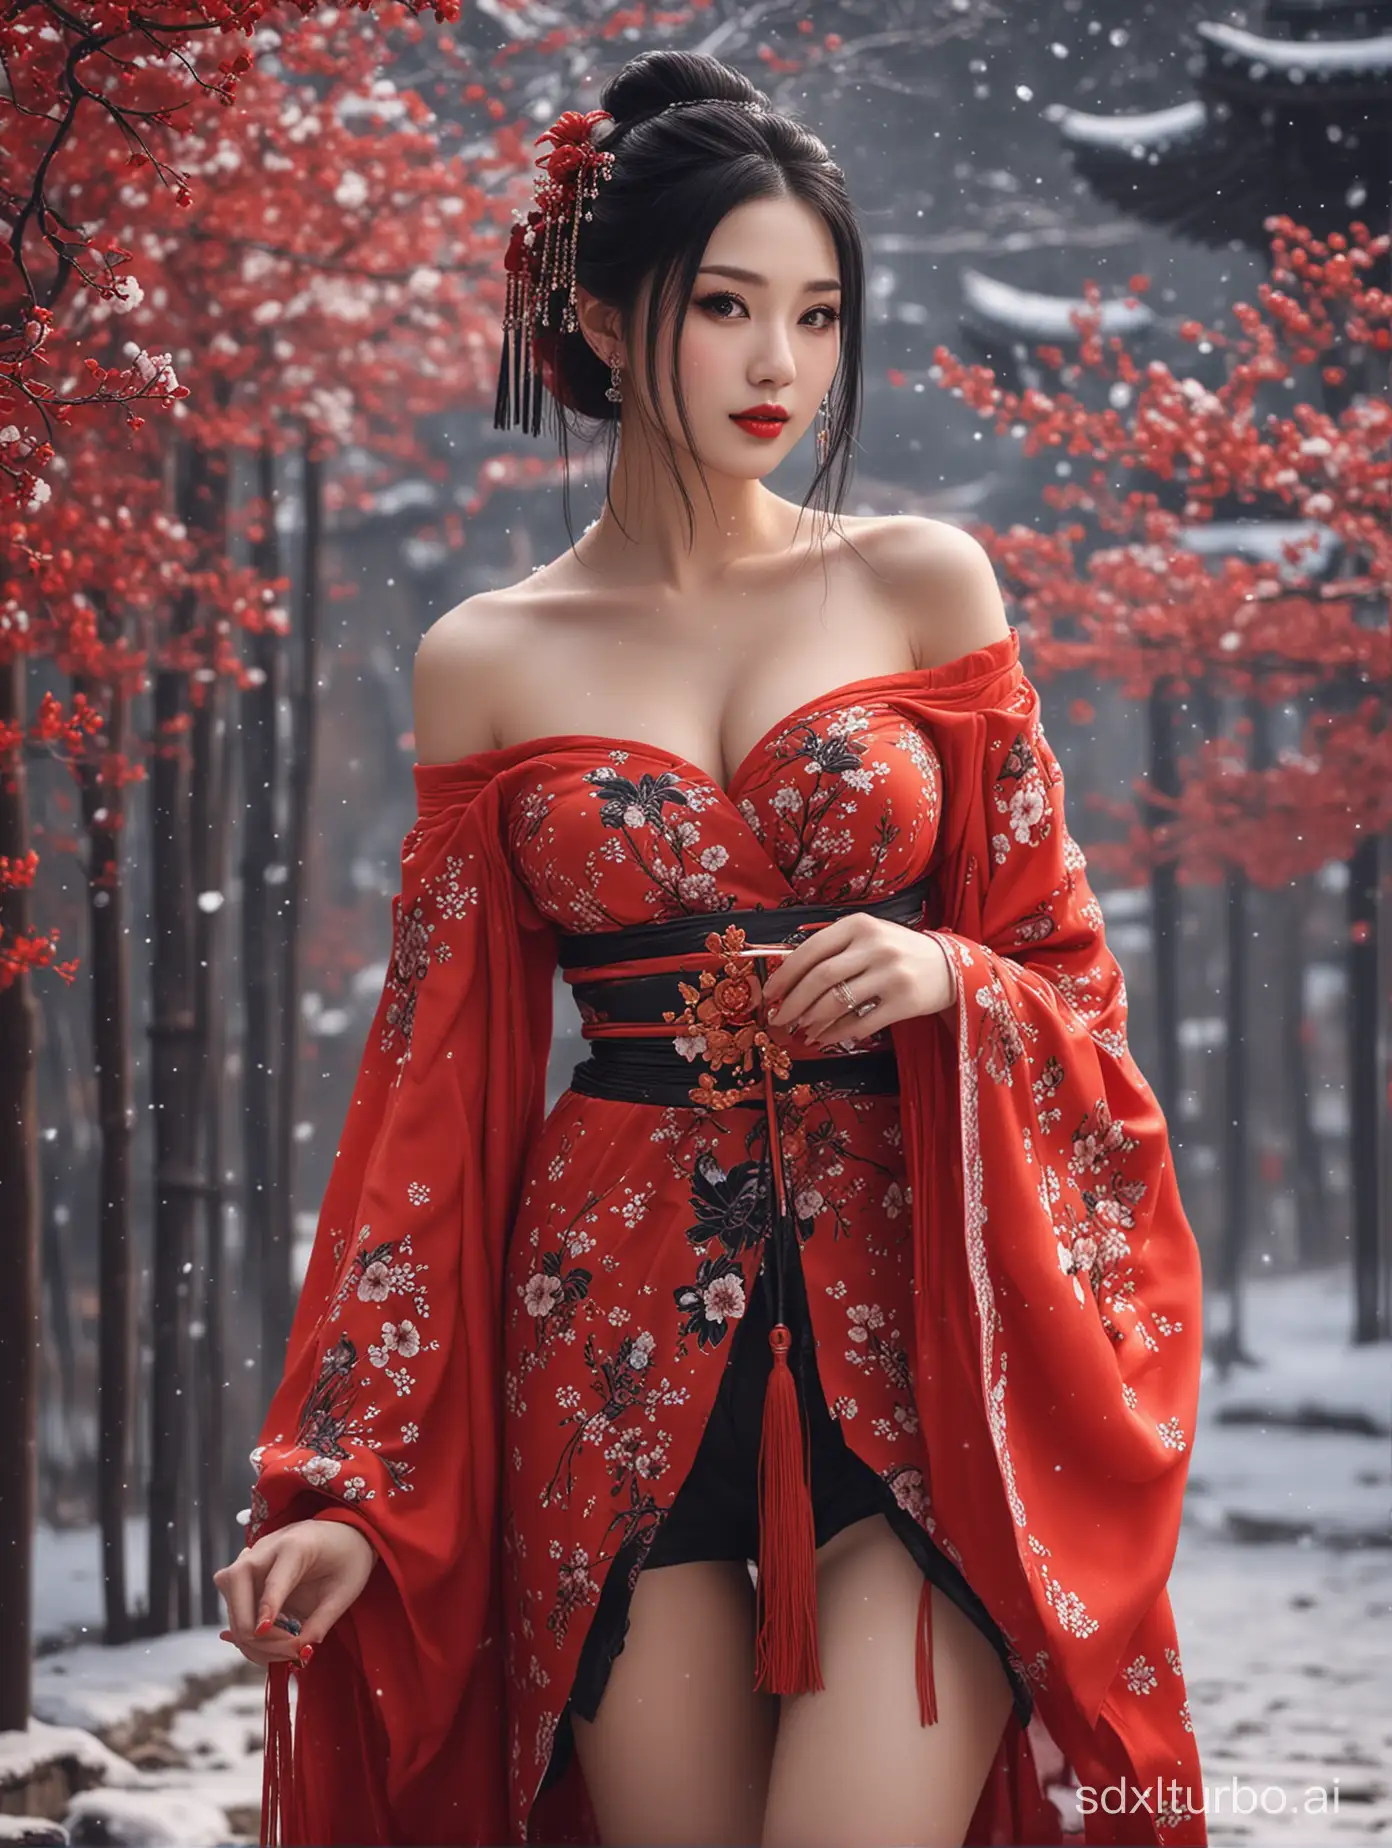 Elegant-Chinese-Lady-in-Red-Floral-Dress-with-Candlelight-Glow